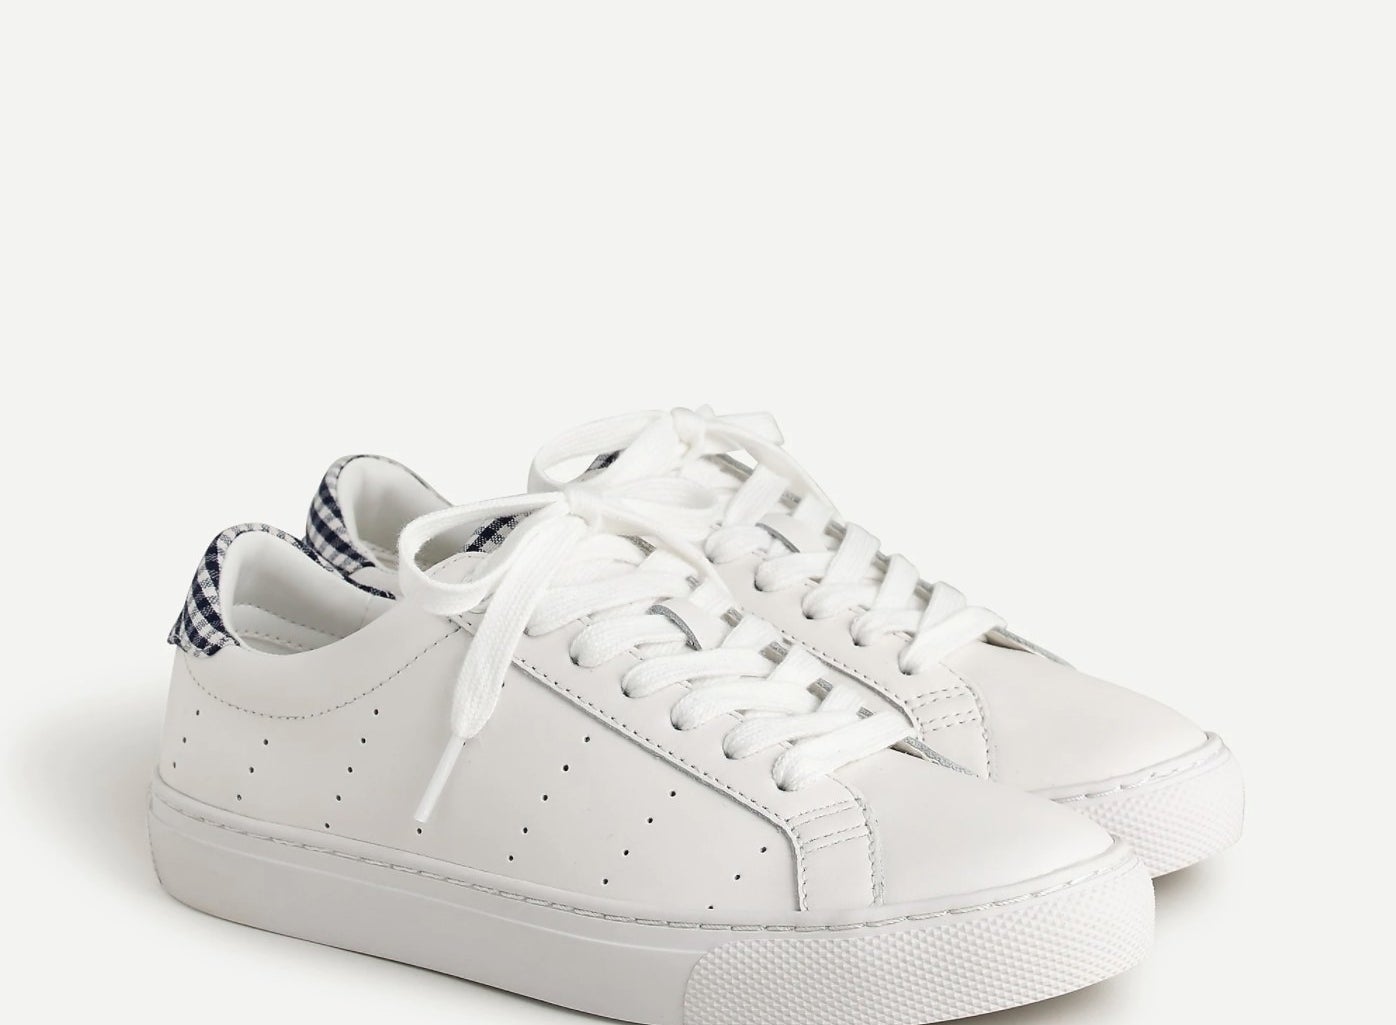 The sneakers in white with gingham on the heels